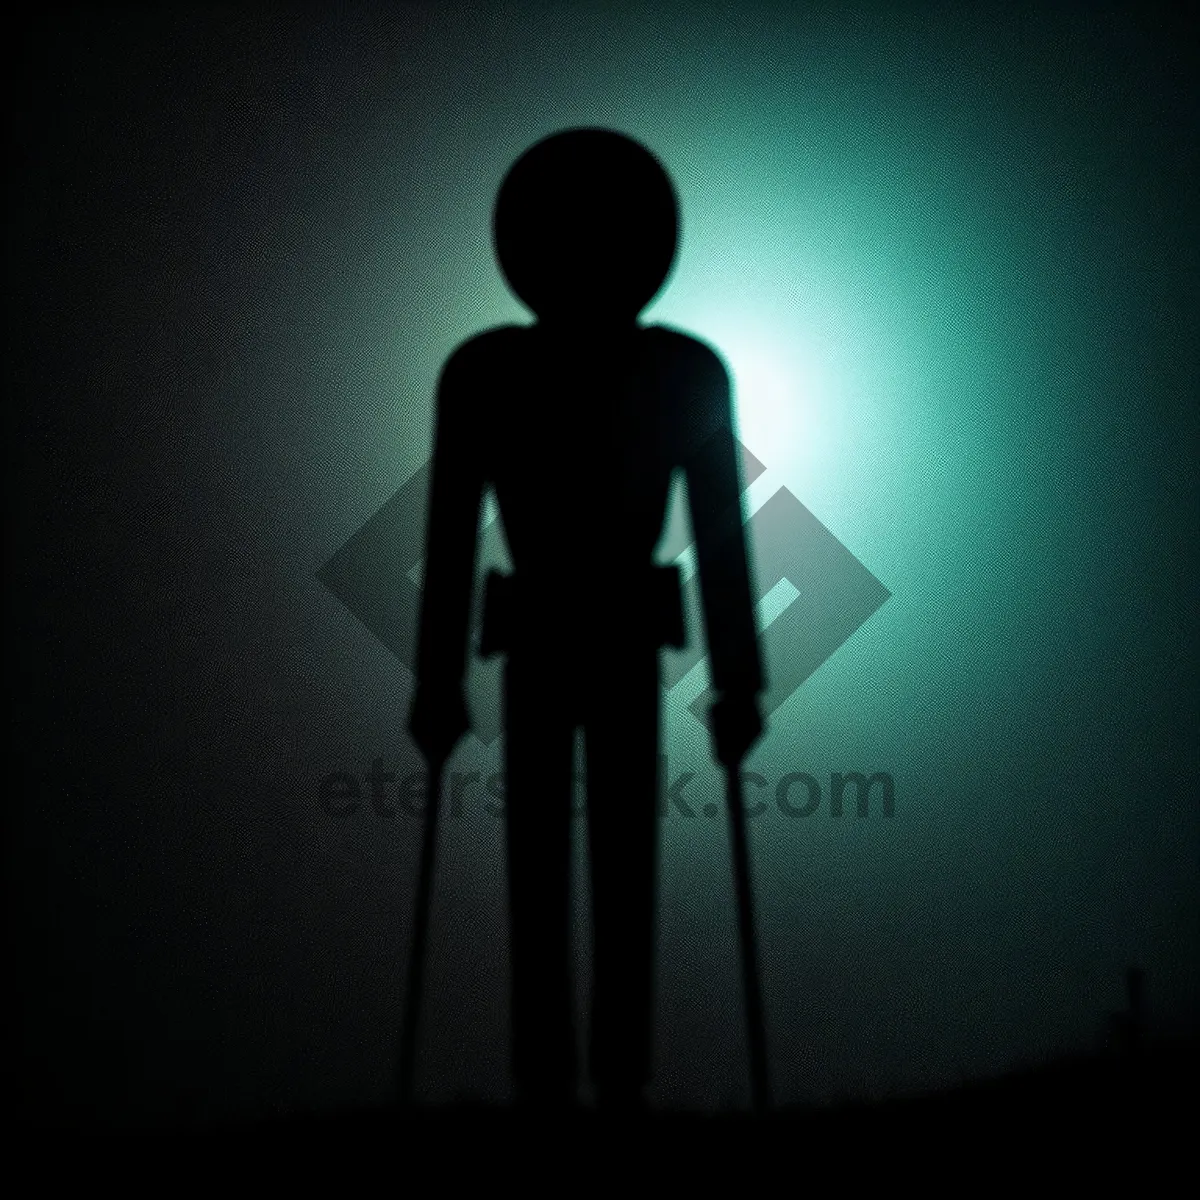 Picture of Black Silhouette of Male Mannequin Figure